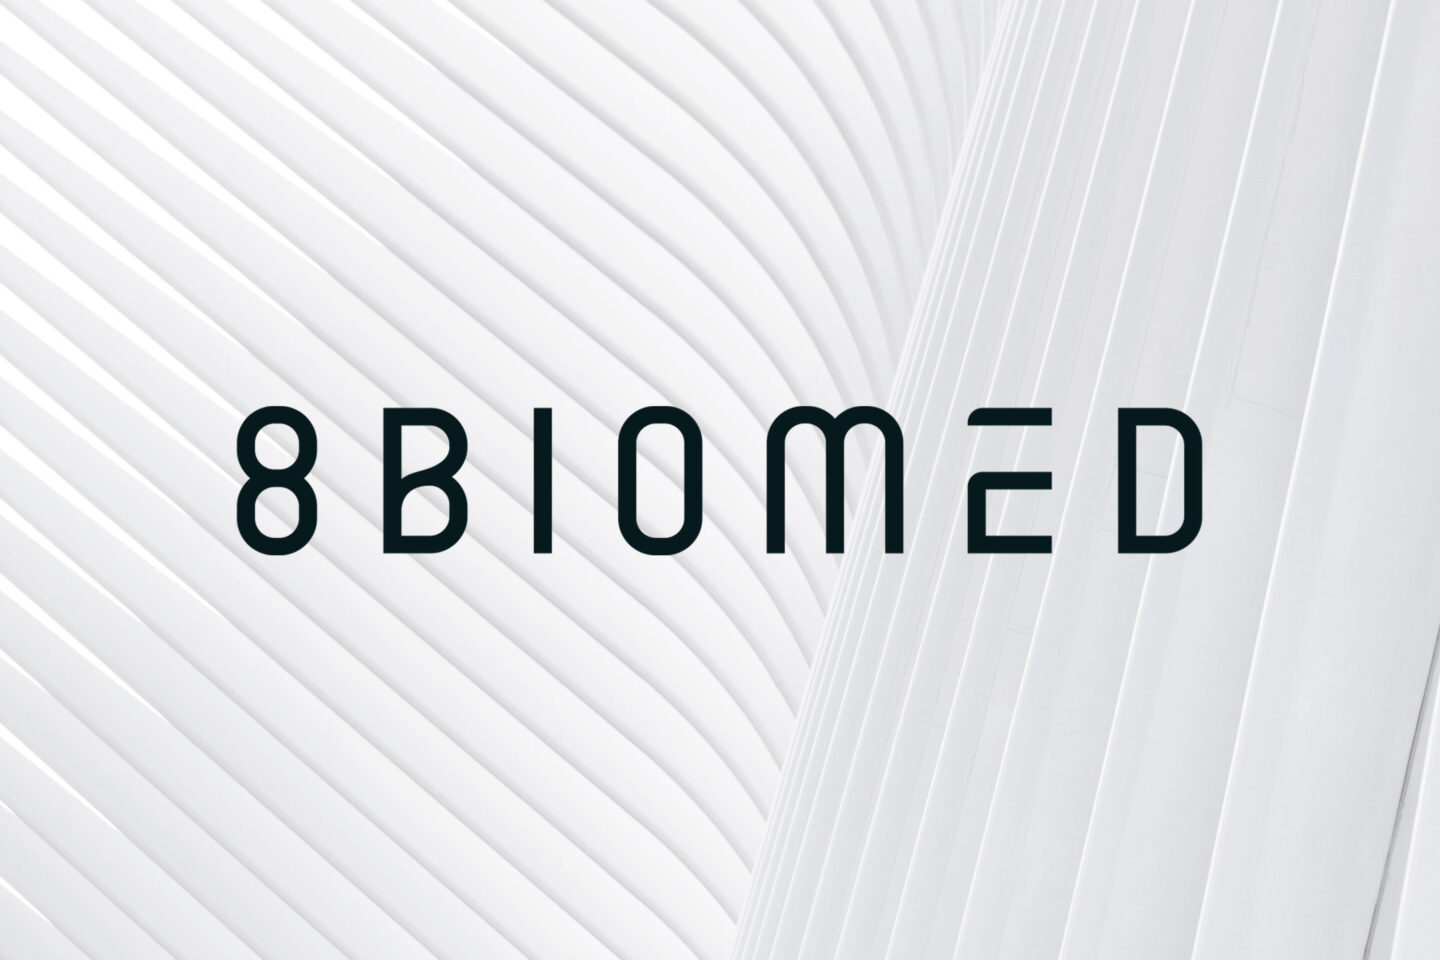 The title 8 Biomed on white background